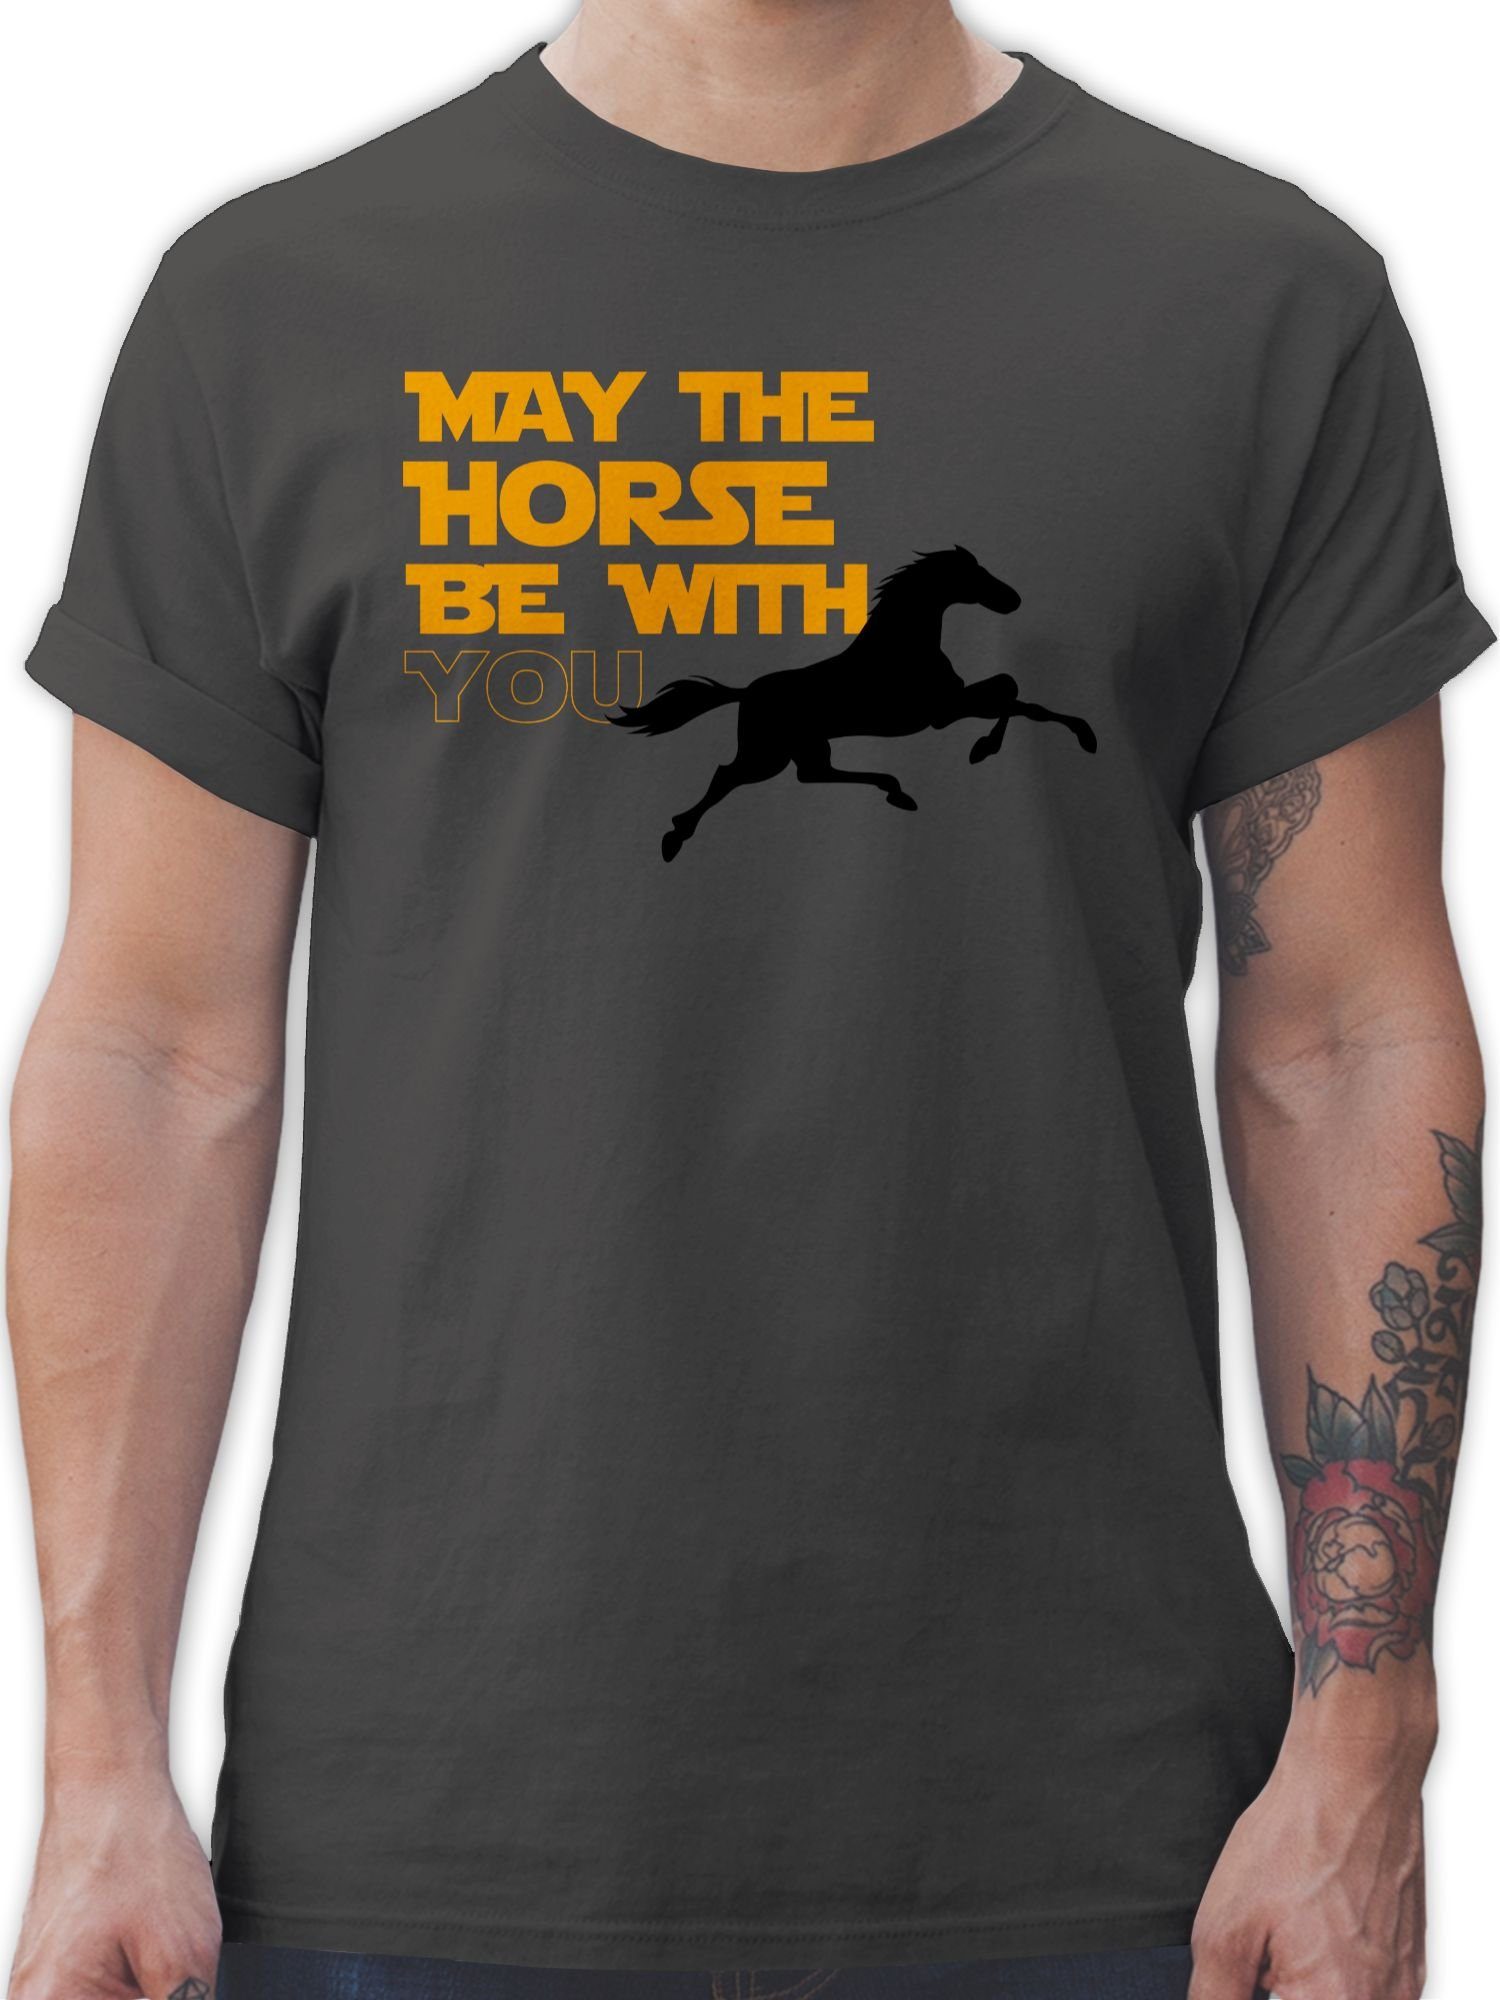 Shirtracer T-Shirt be with Pferd May the you Dunkelgrau horse 1